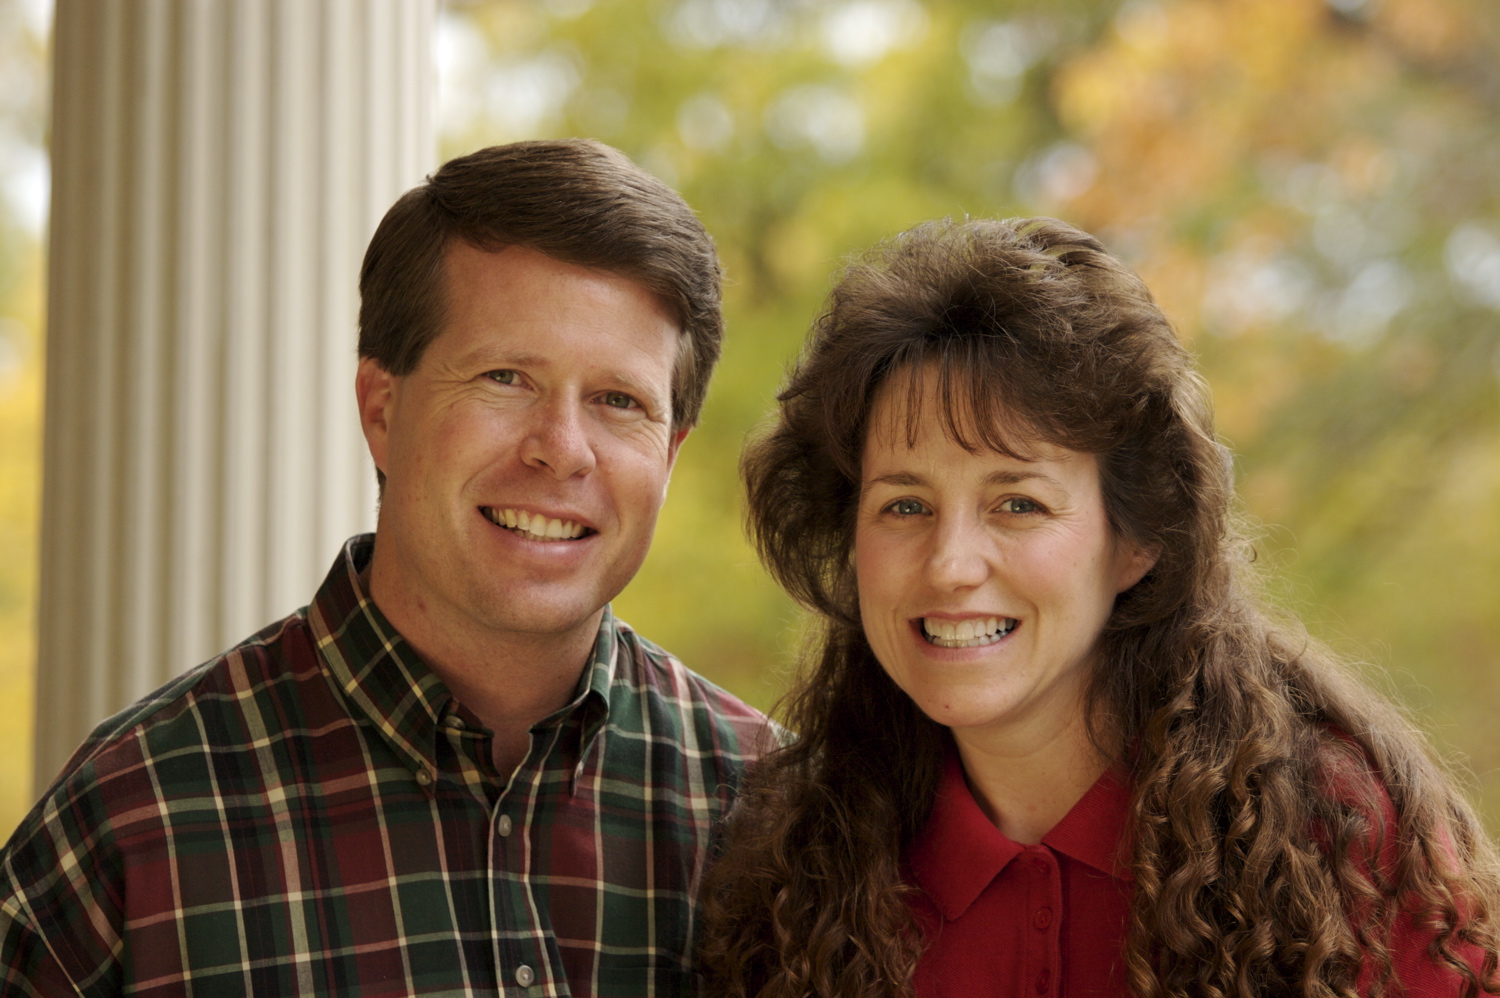 Jim Bob and Michelle Duggar - 19 Kids and Counting